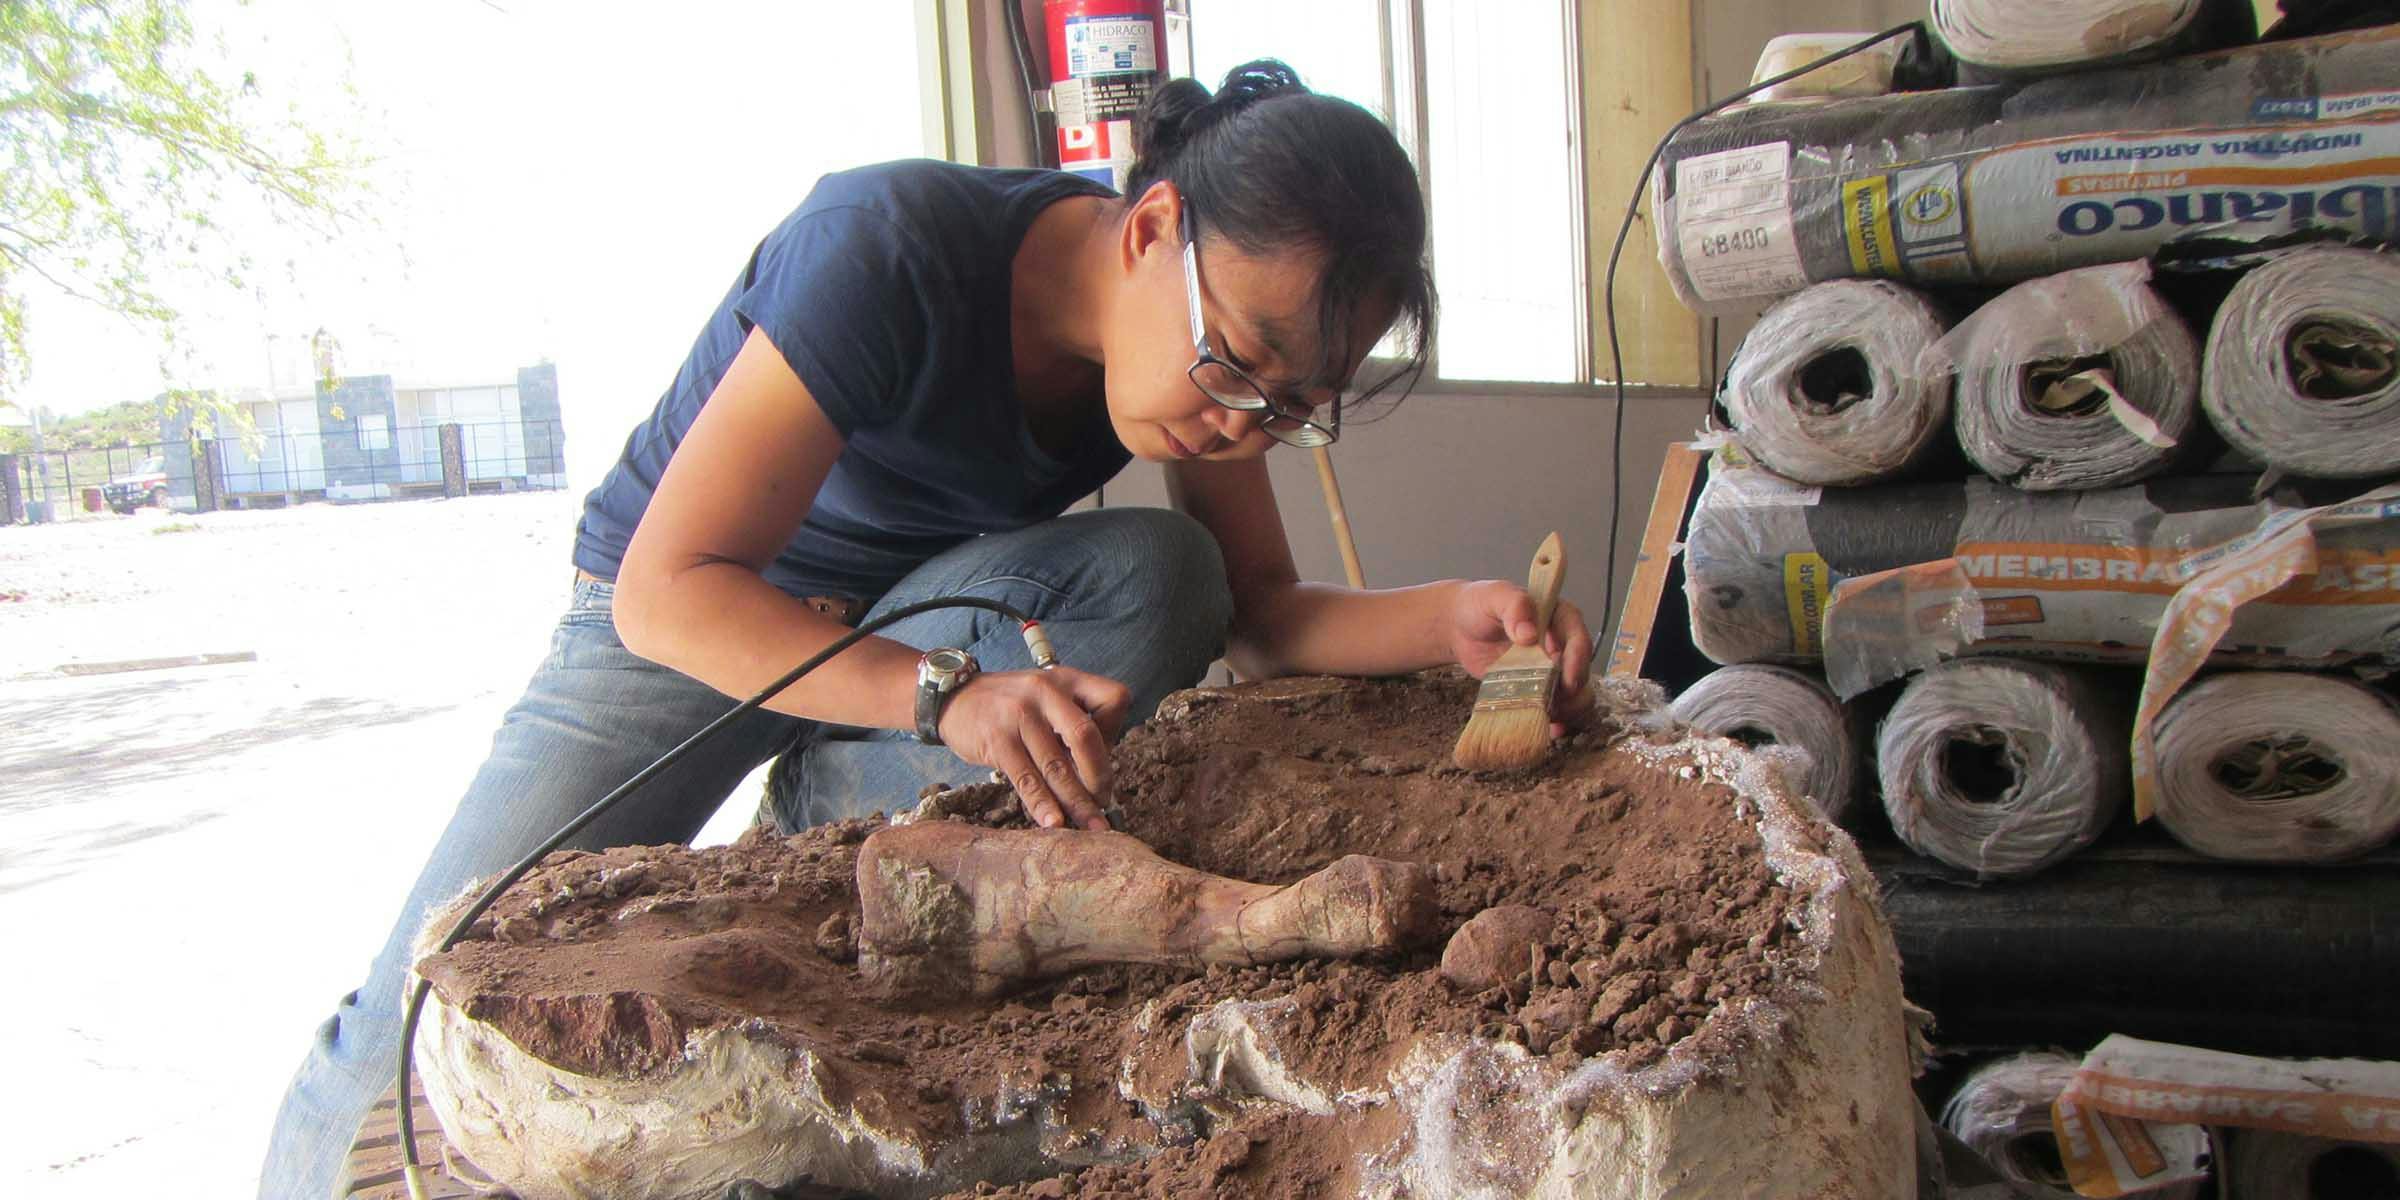 A woman holding an electric hand tool and a painter's brush, leaning over a large mass of dirt with bones protruding from it